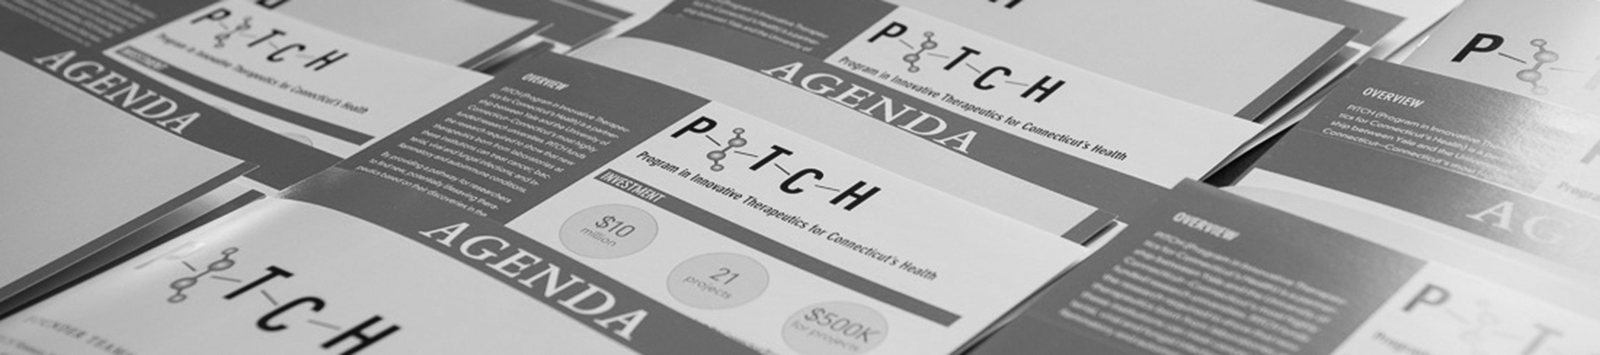 Image of PITCH brochures